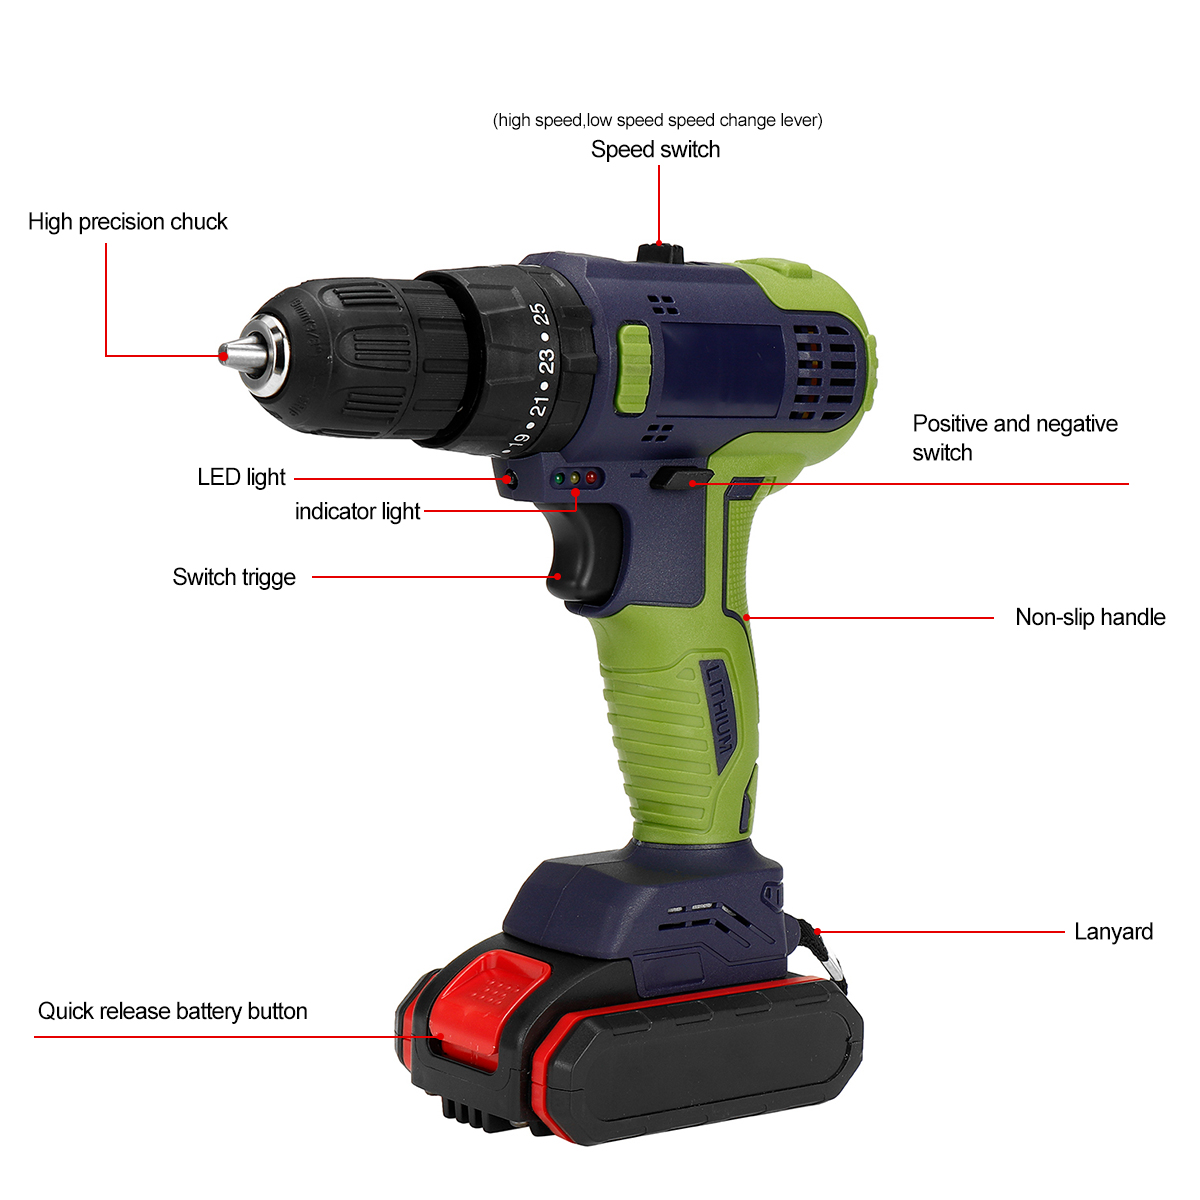 32V-Brushless-Impact-Drill-Lithium-Electric-Torque-Drill-Driver-With-12-Battery-LED-Light-1837414-3